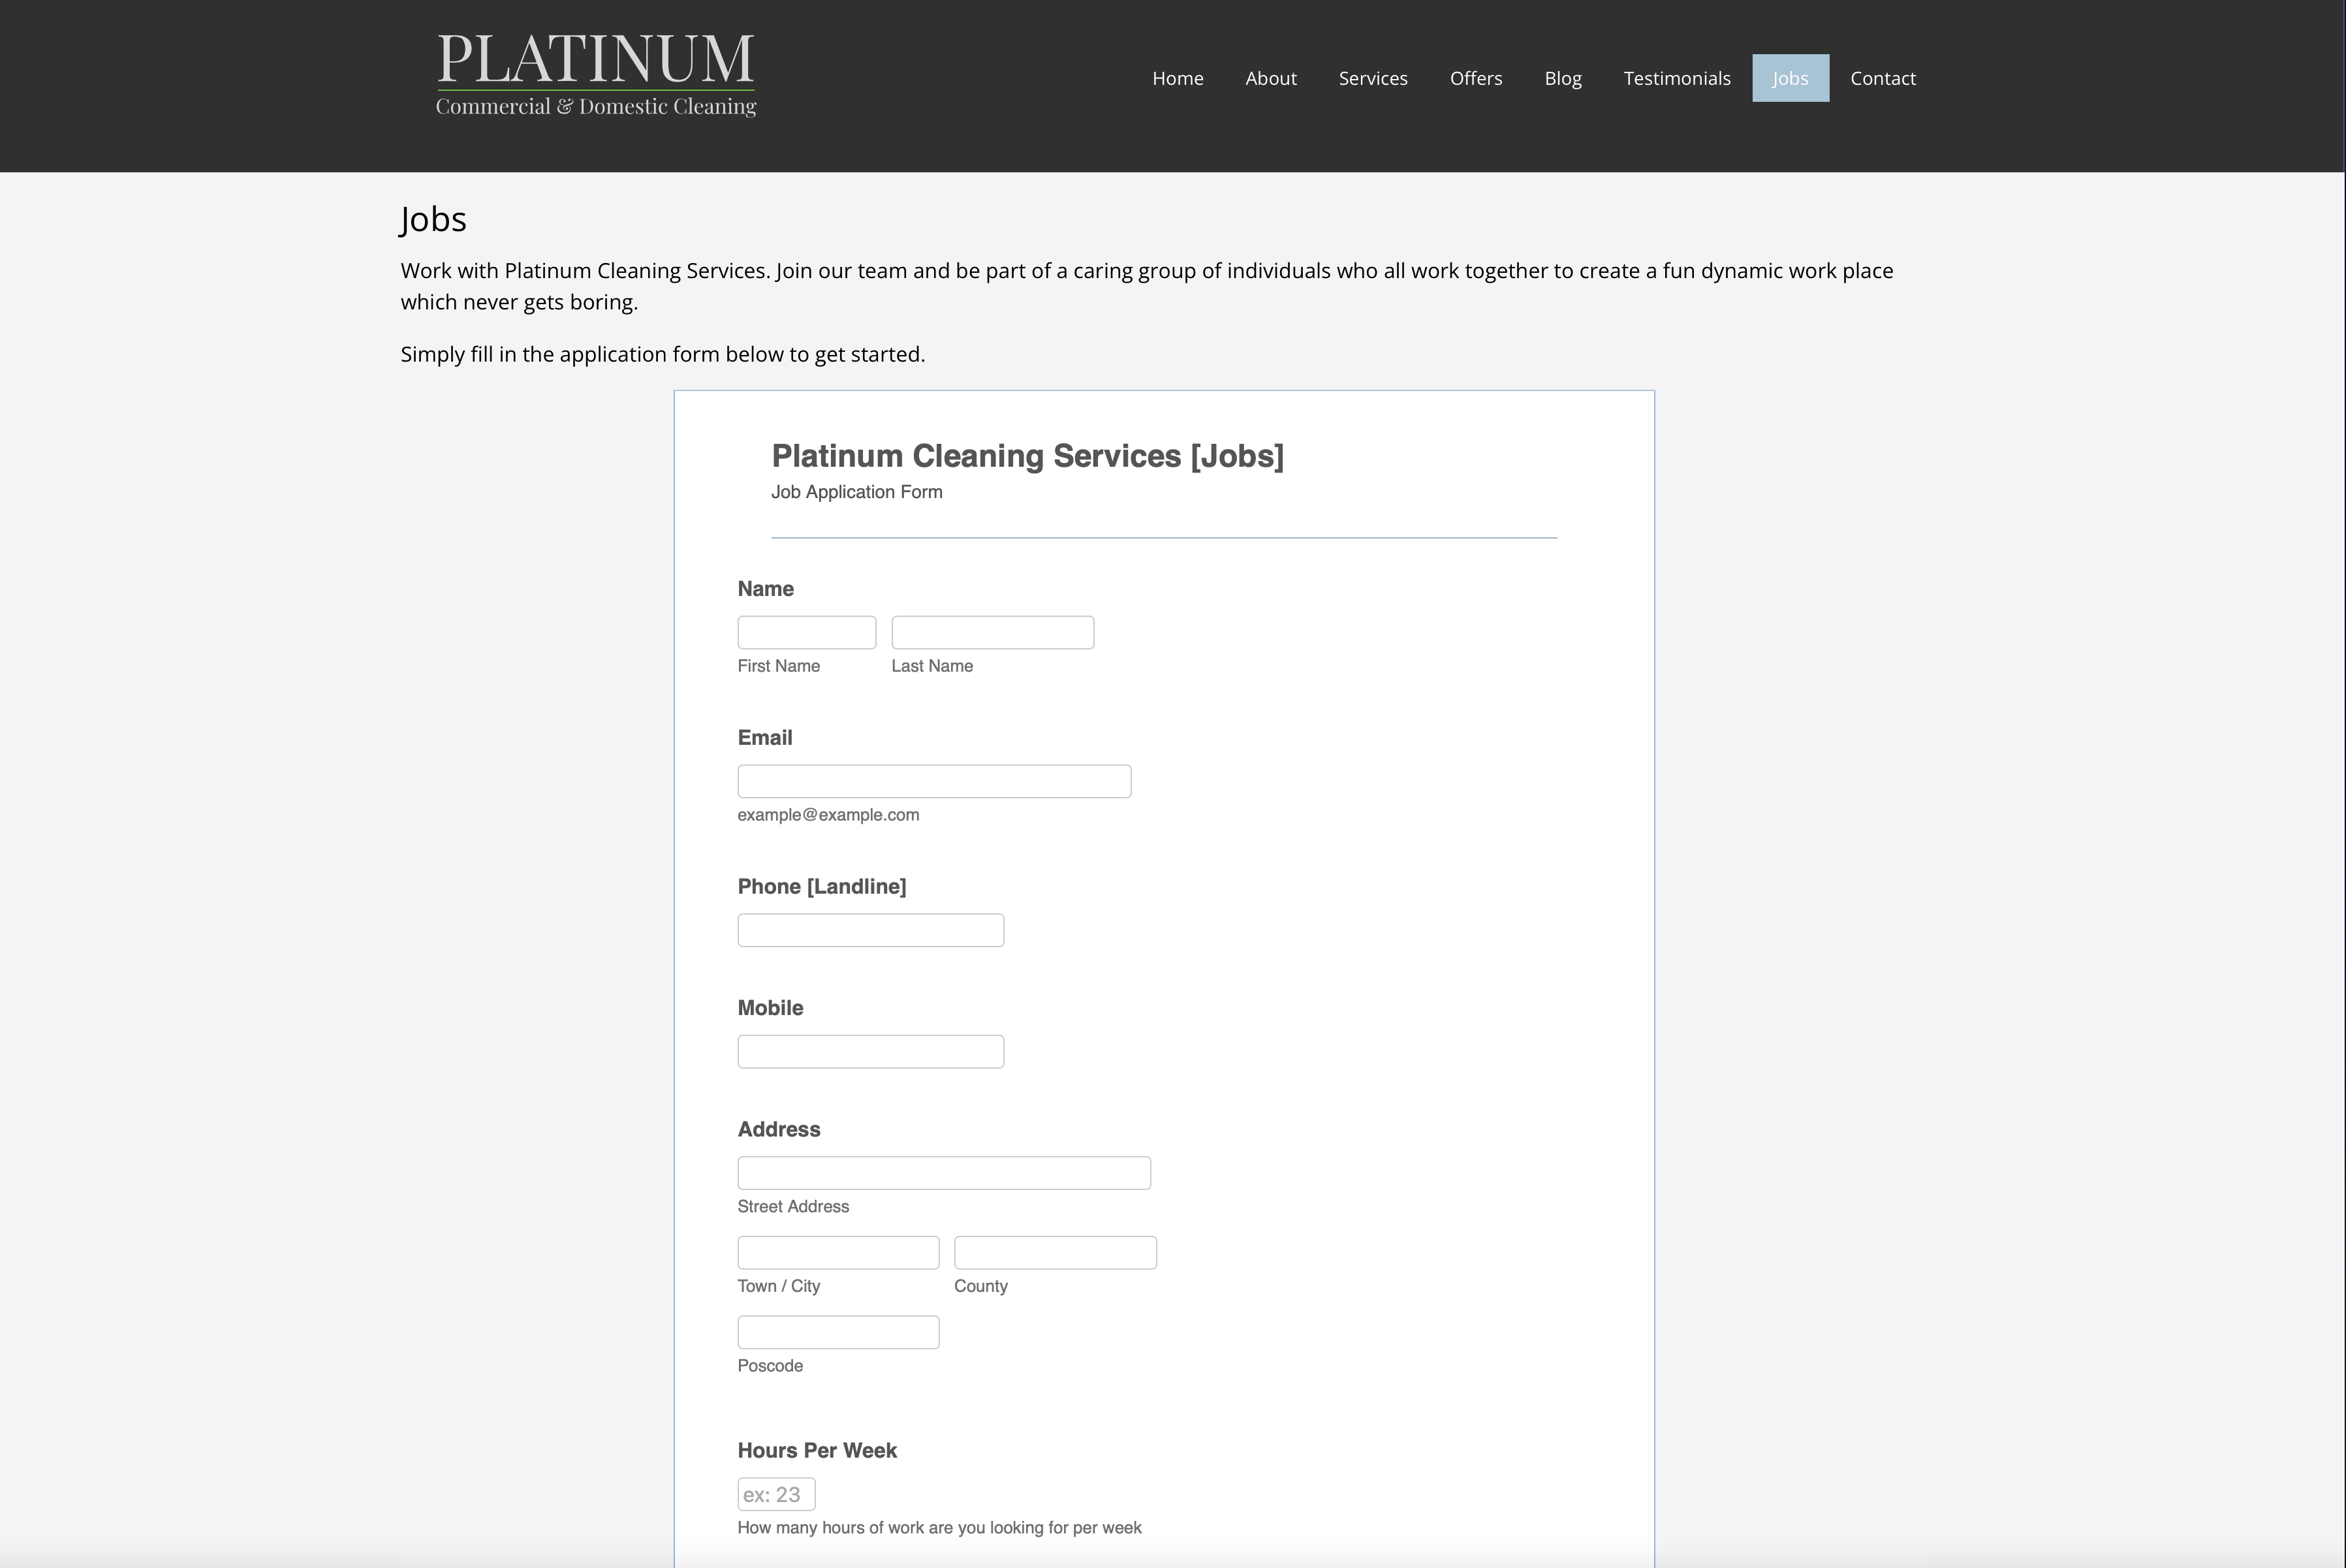 Platinum cleaning website painting pixels about page digital marketing campaign social media website redesign